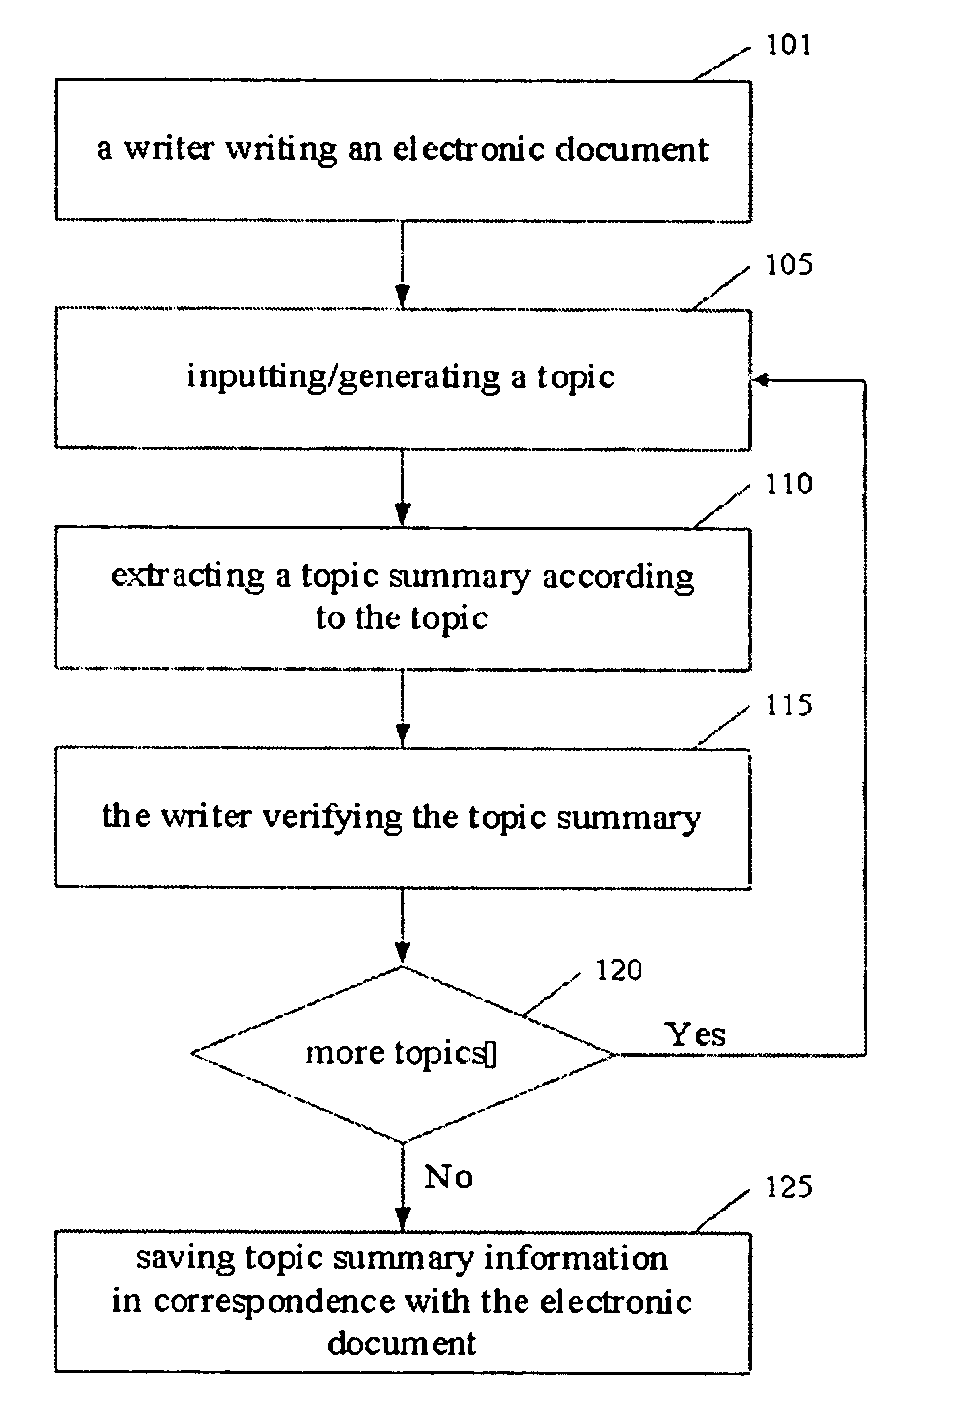 Computer aided authoring, electronic document browsing, retrieving, and subscribing and publishing